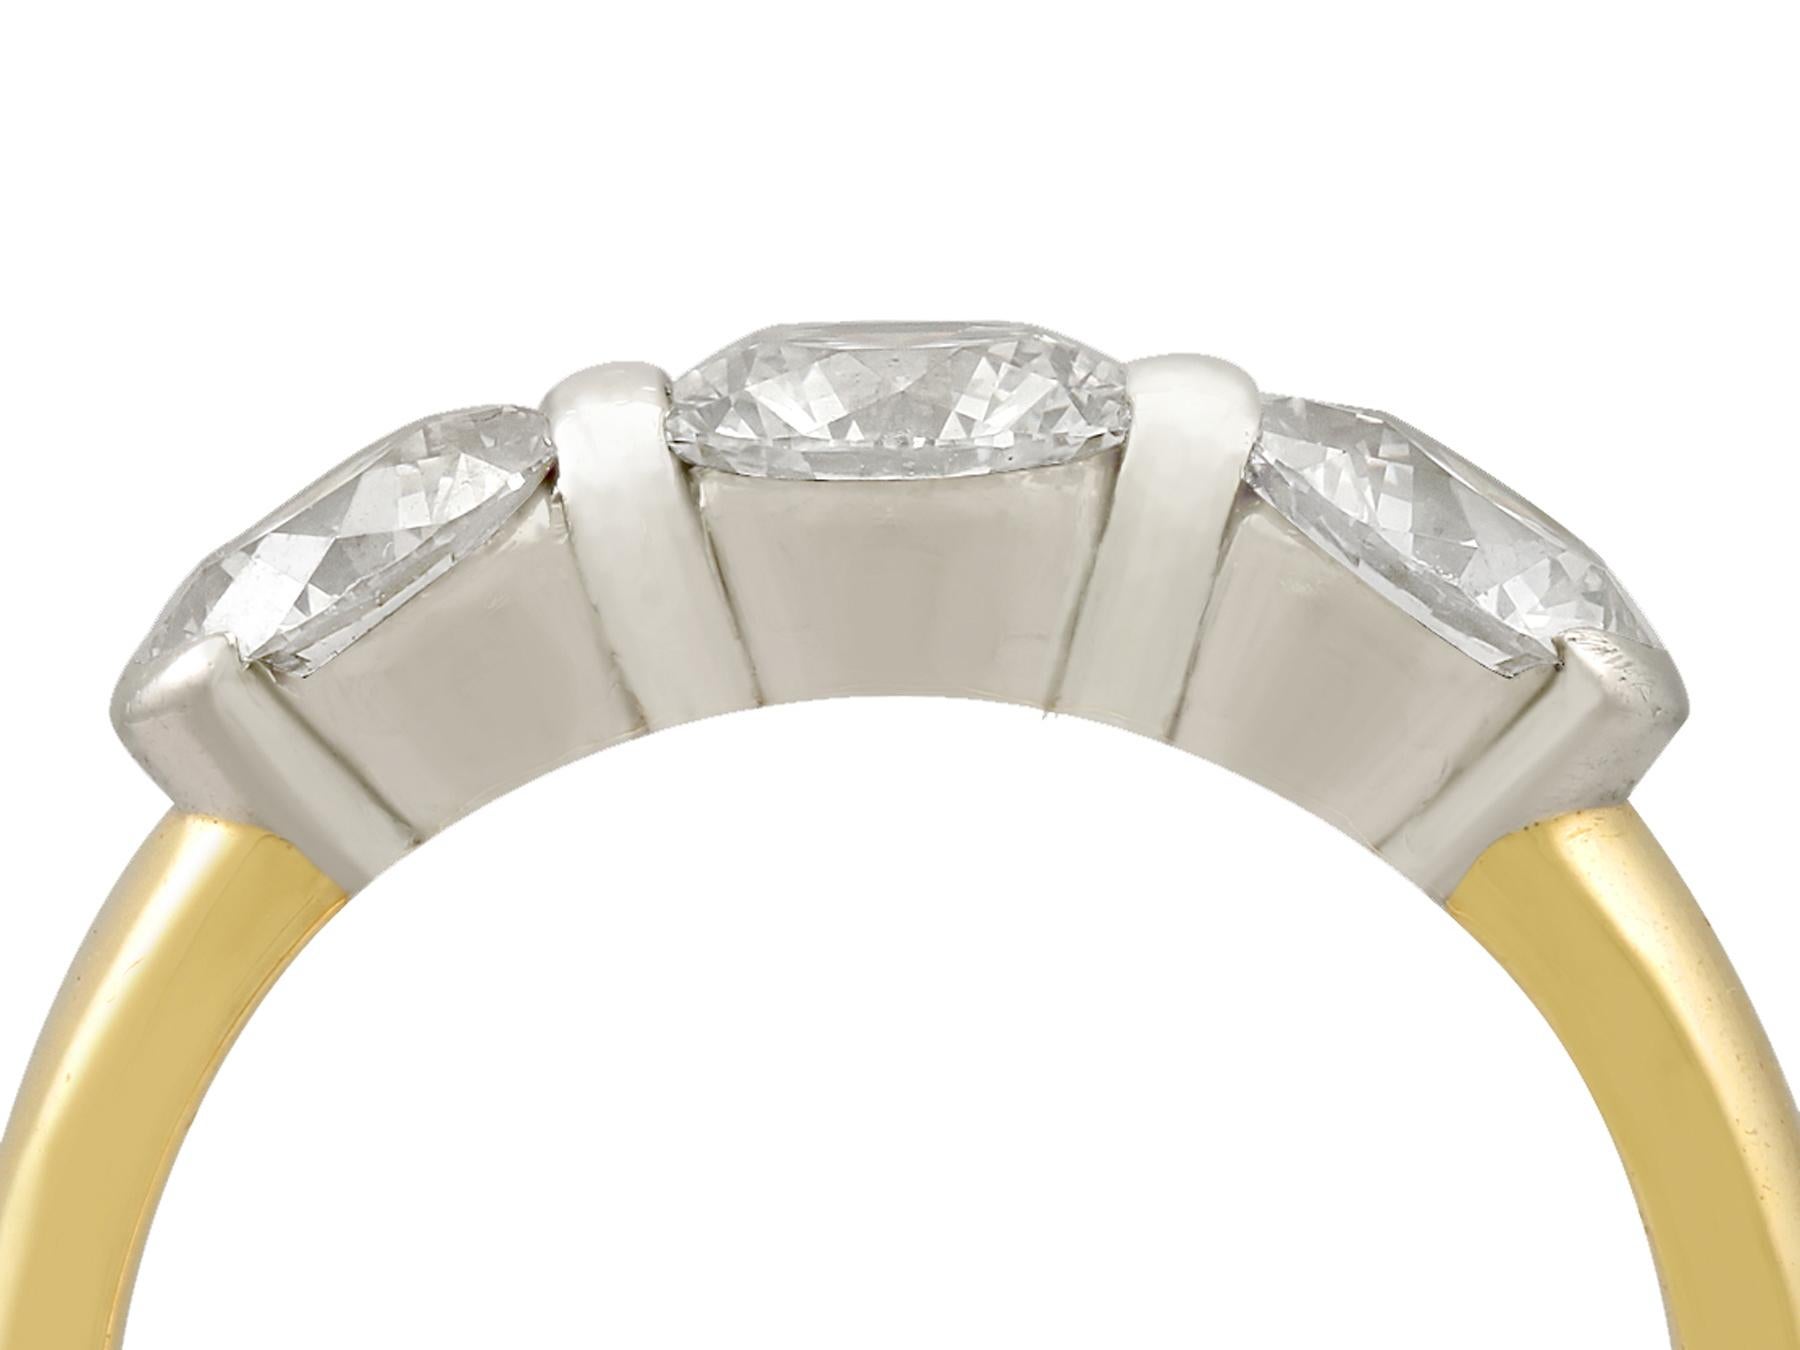 A stunning contemporary Tiffany & Co 2.13 carat diamond and 18 karat yellow gold, platinum set trilogy ring; part of our diverse diamond jewelry and estate jewelry collections.

This stunning, fine and impressive Tiffany & Co three stone diamond